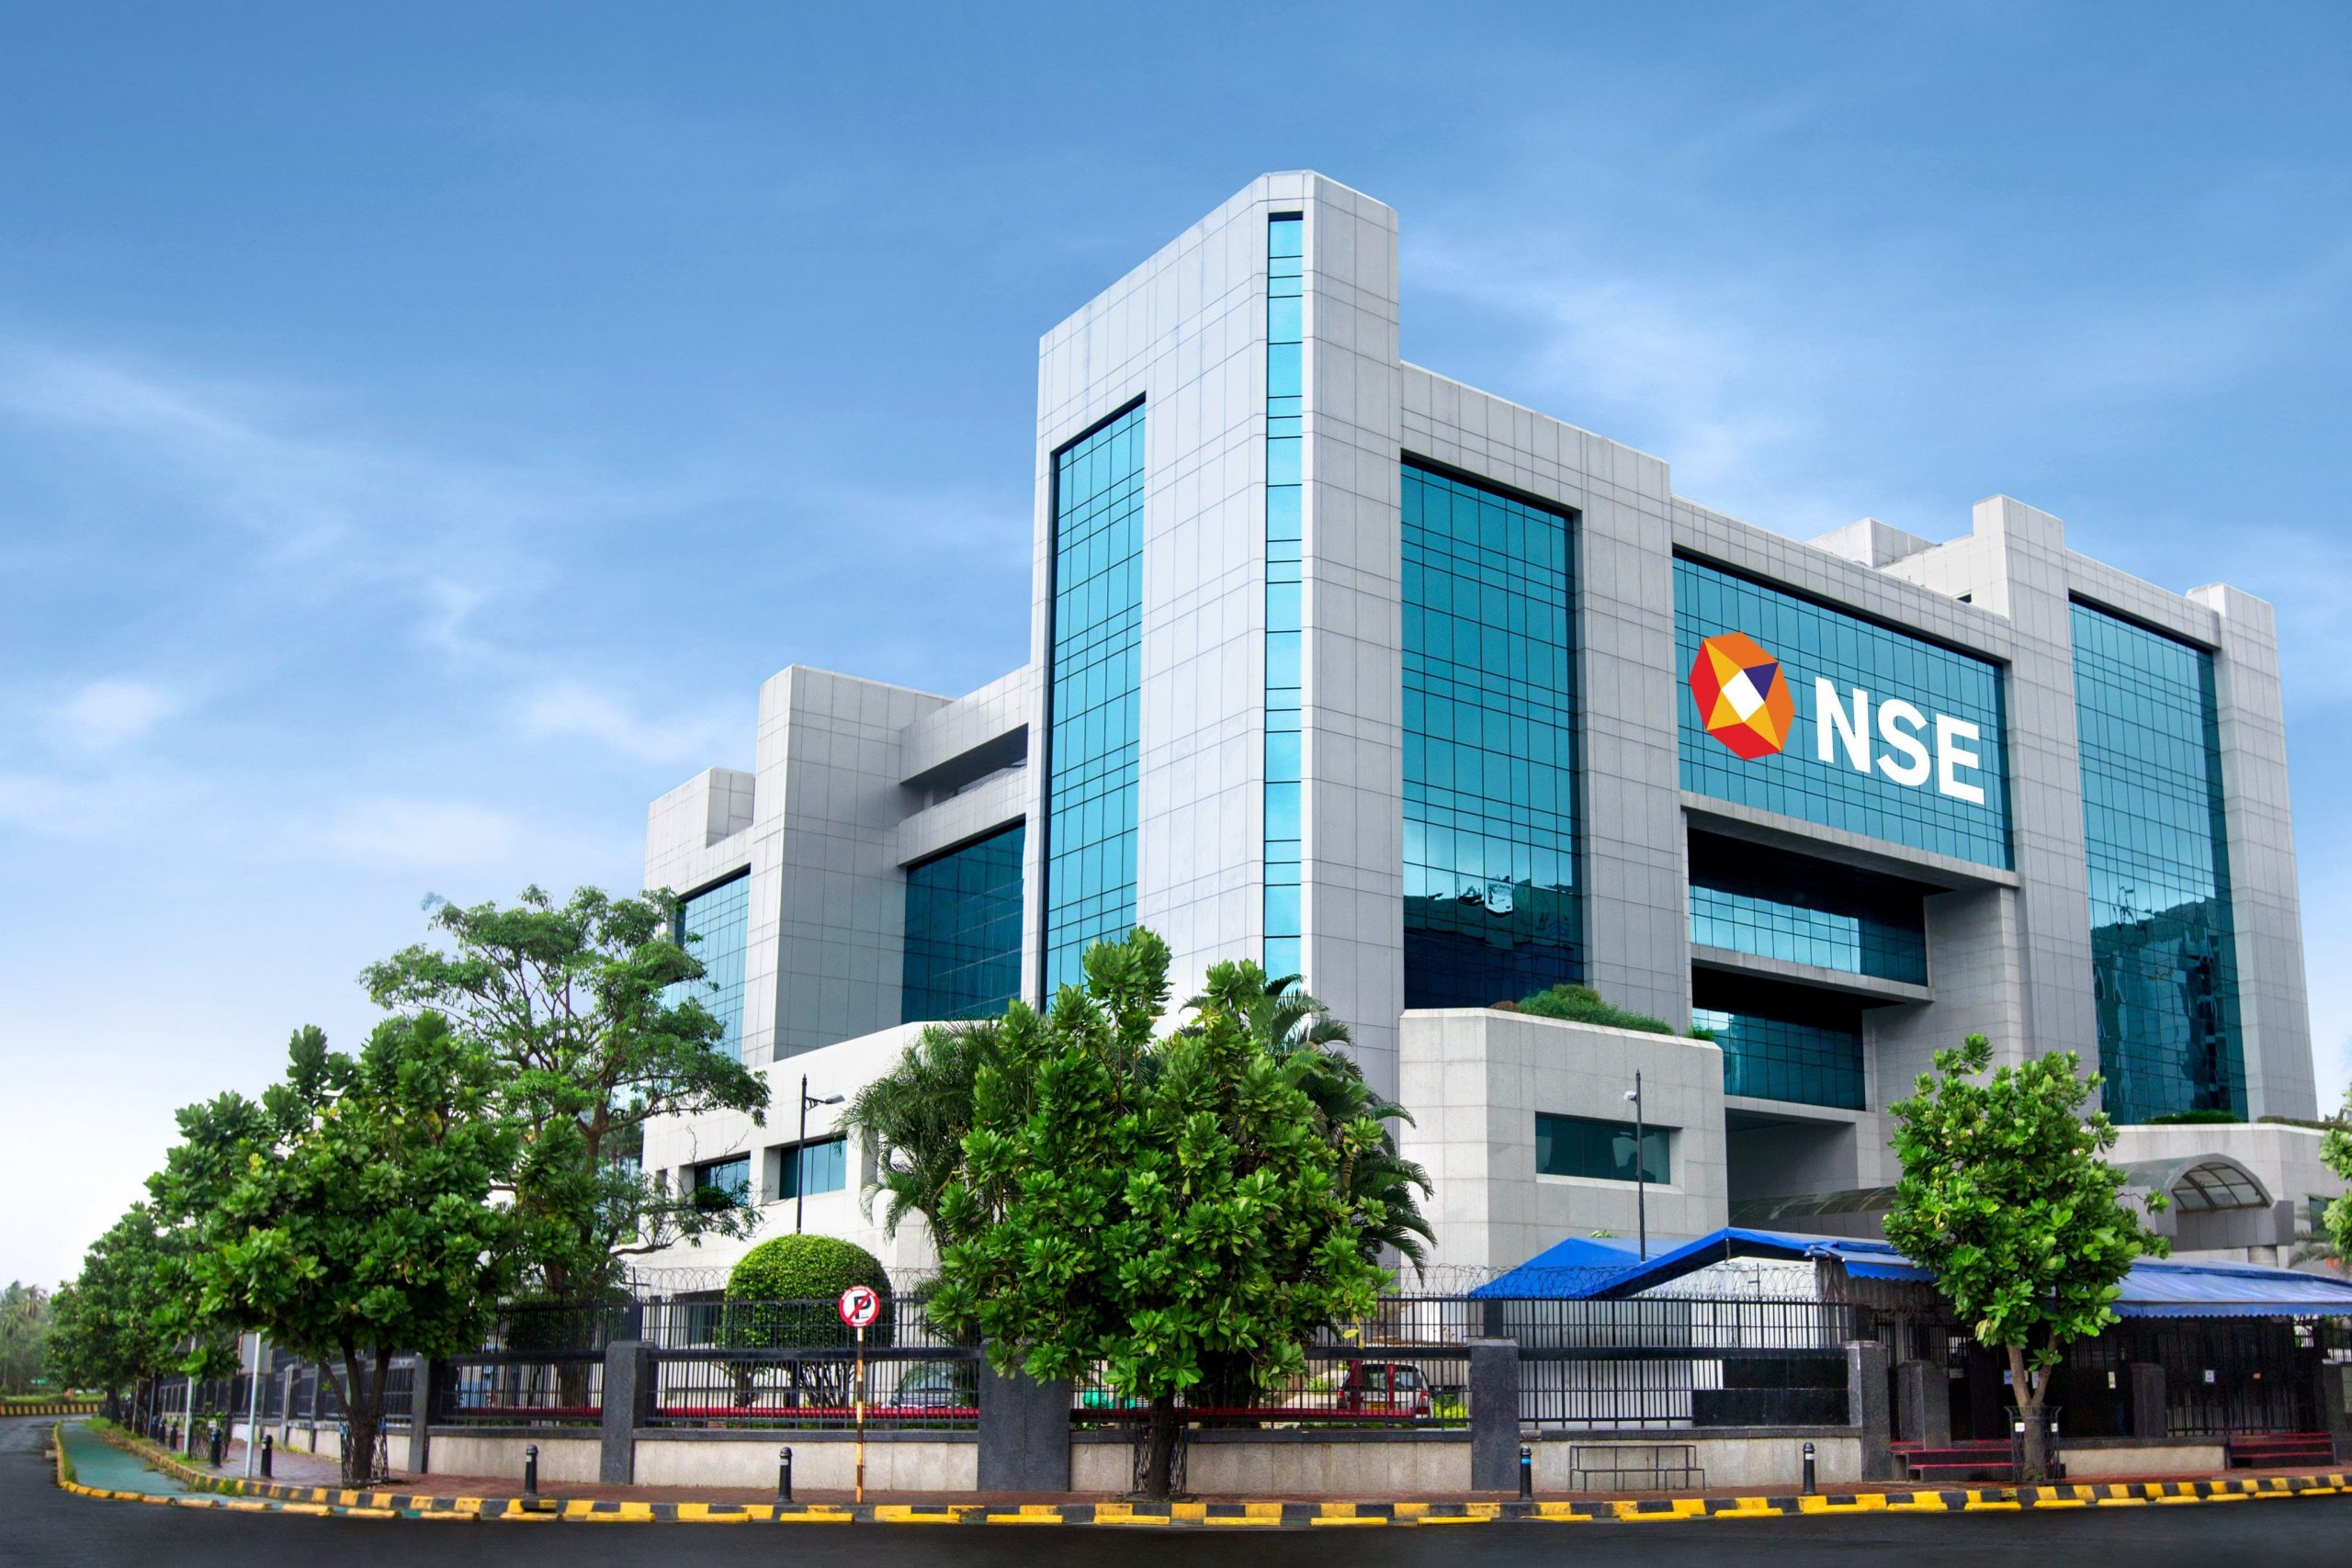 NSE F&O Ban: Escorts is under ban on Wednesday, August 3, 2022